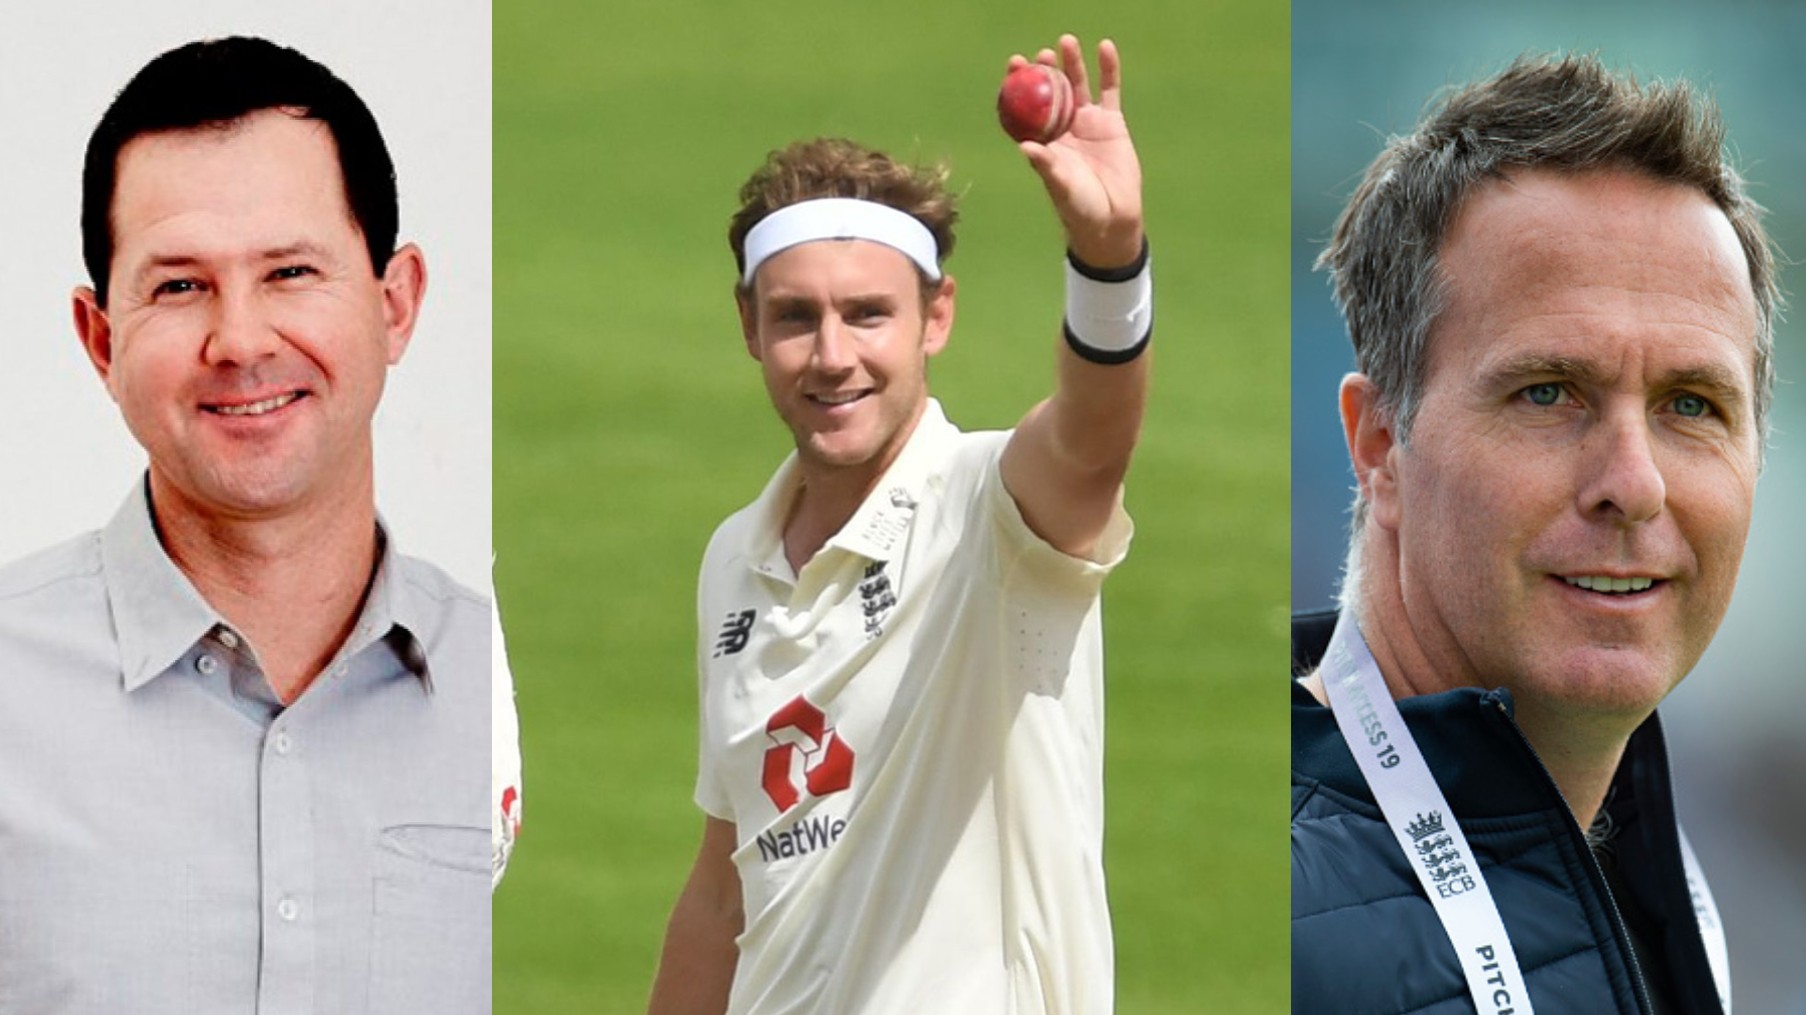 ENG v WI 2020: Stuart Broad completes 500 Test wickets; cricket fraternity lauds his achievement